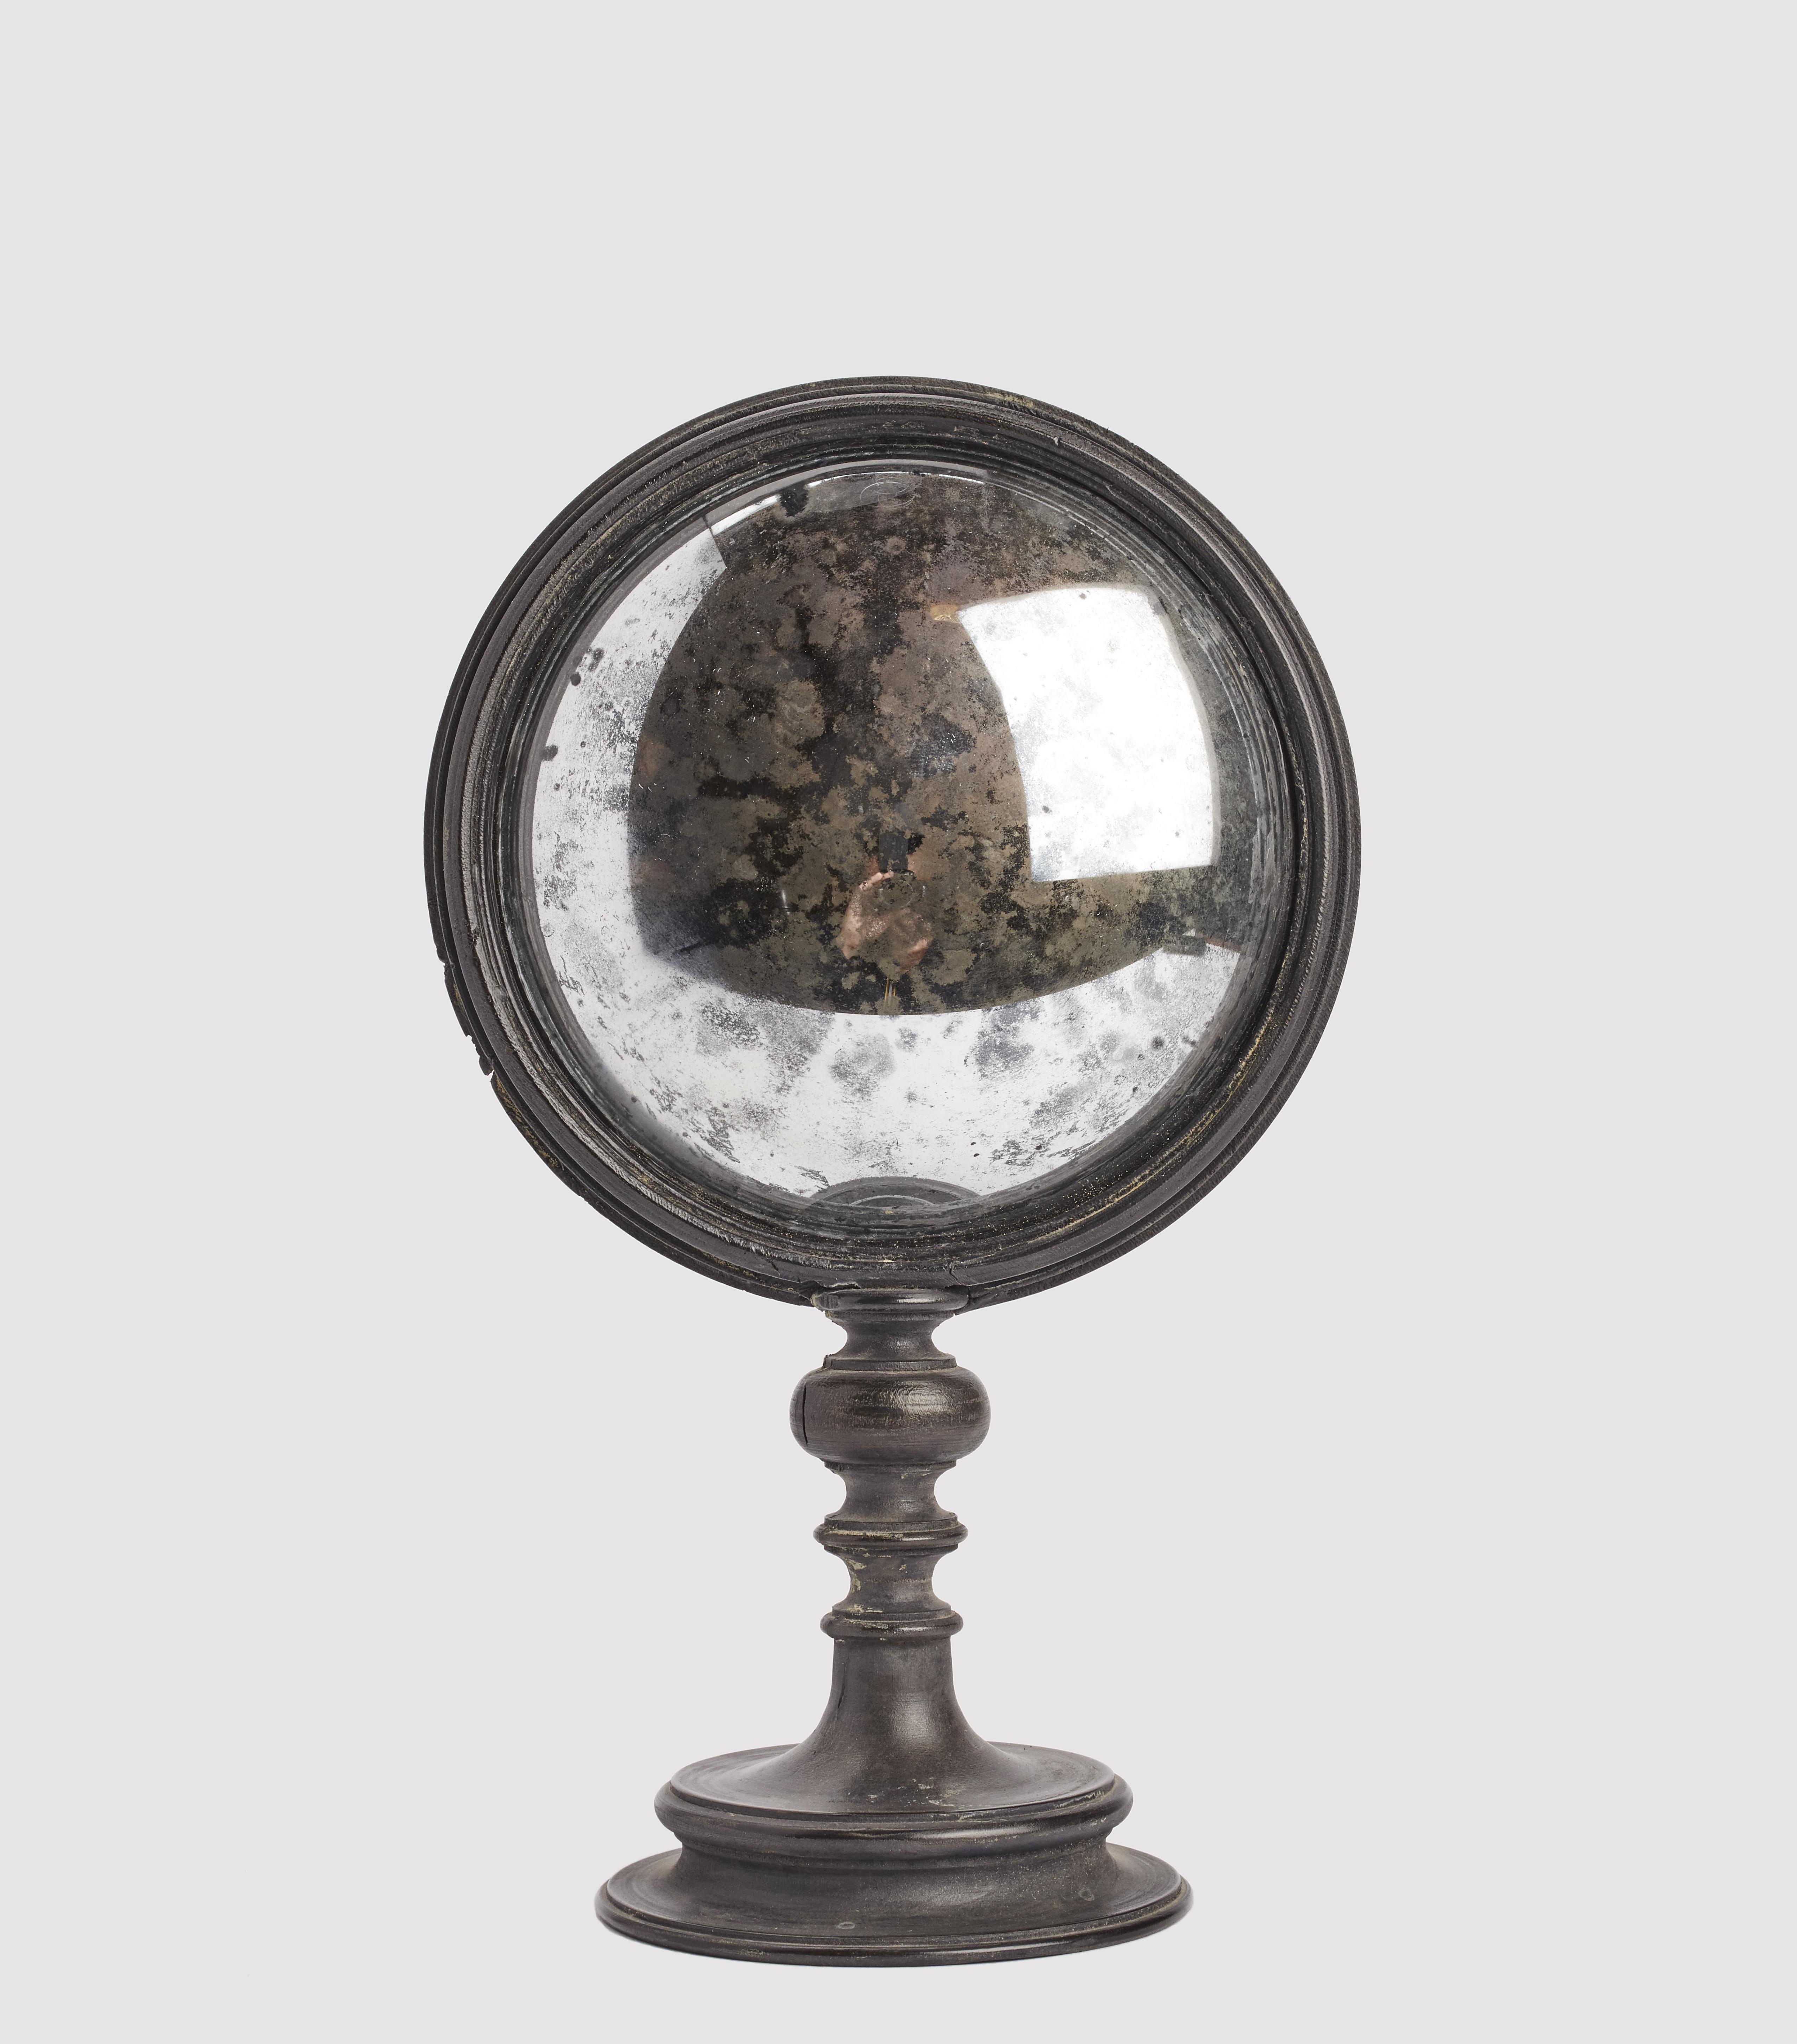 A Wunderkammer round convex mirror with black wooden frame mounted over a black wooden round base. On the rear of the frame there is one round mother of pearl nacre stone. Italy second half of 19th century.